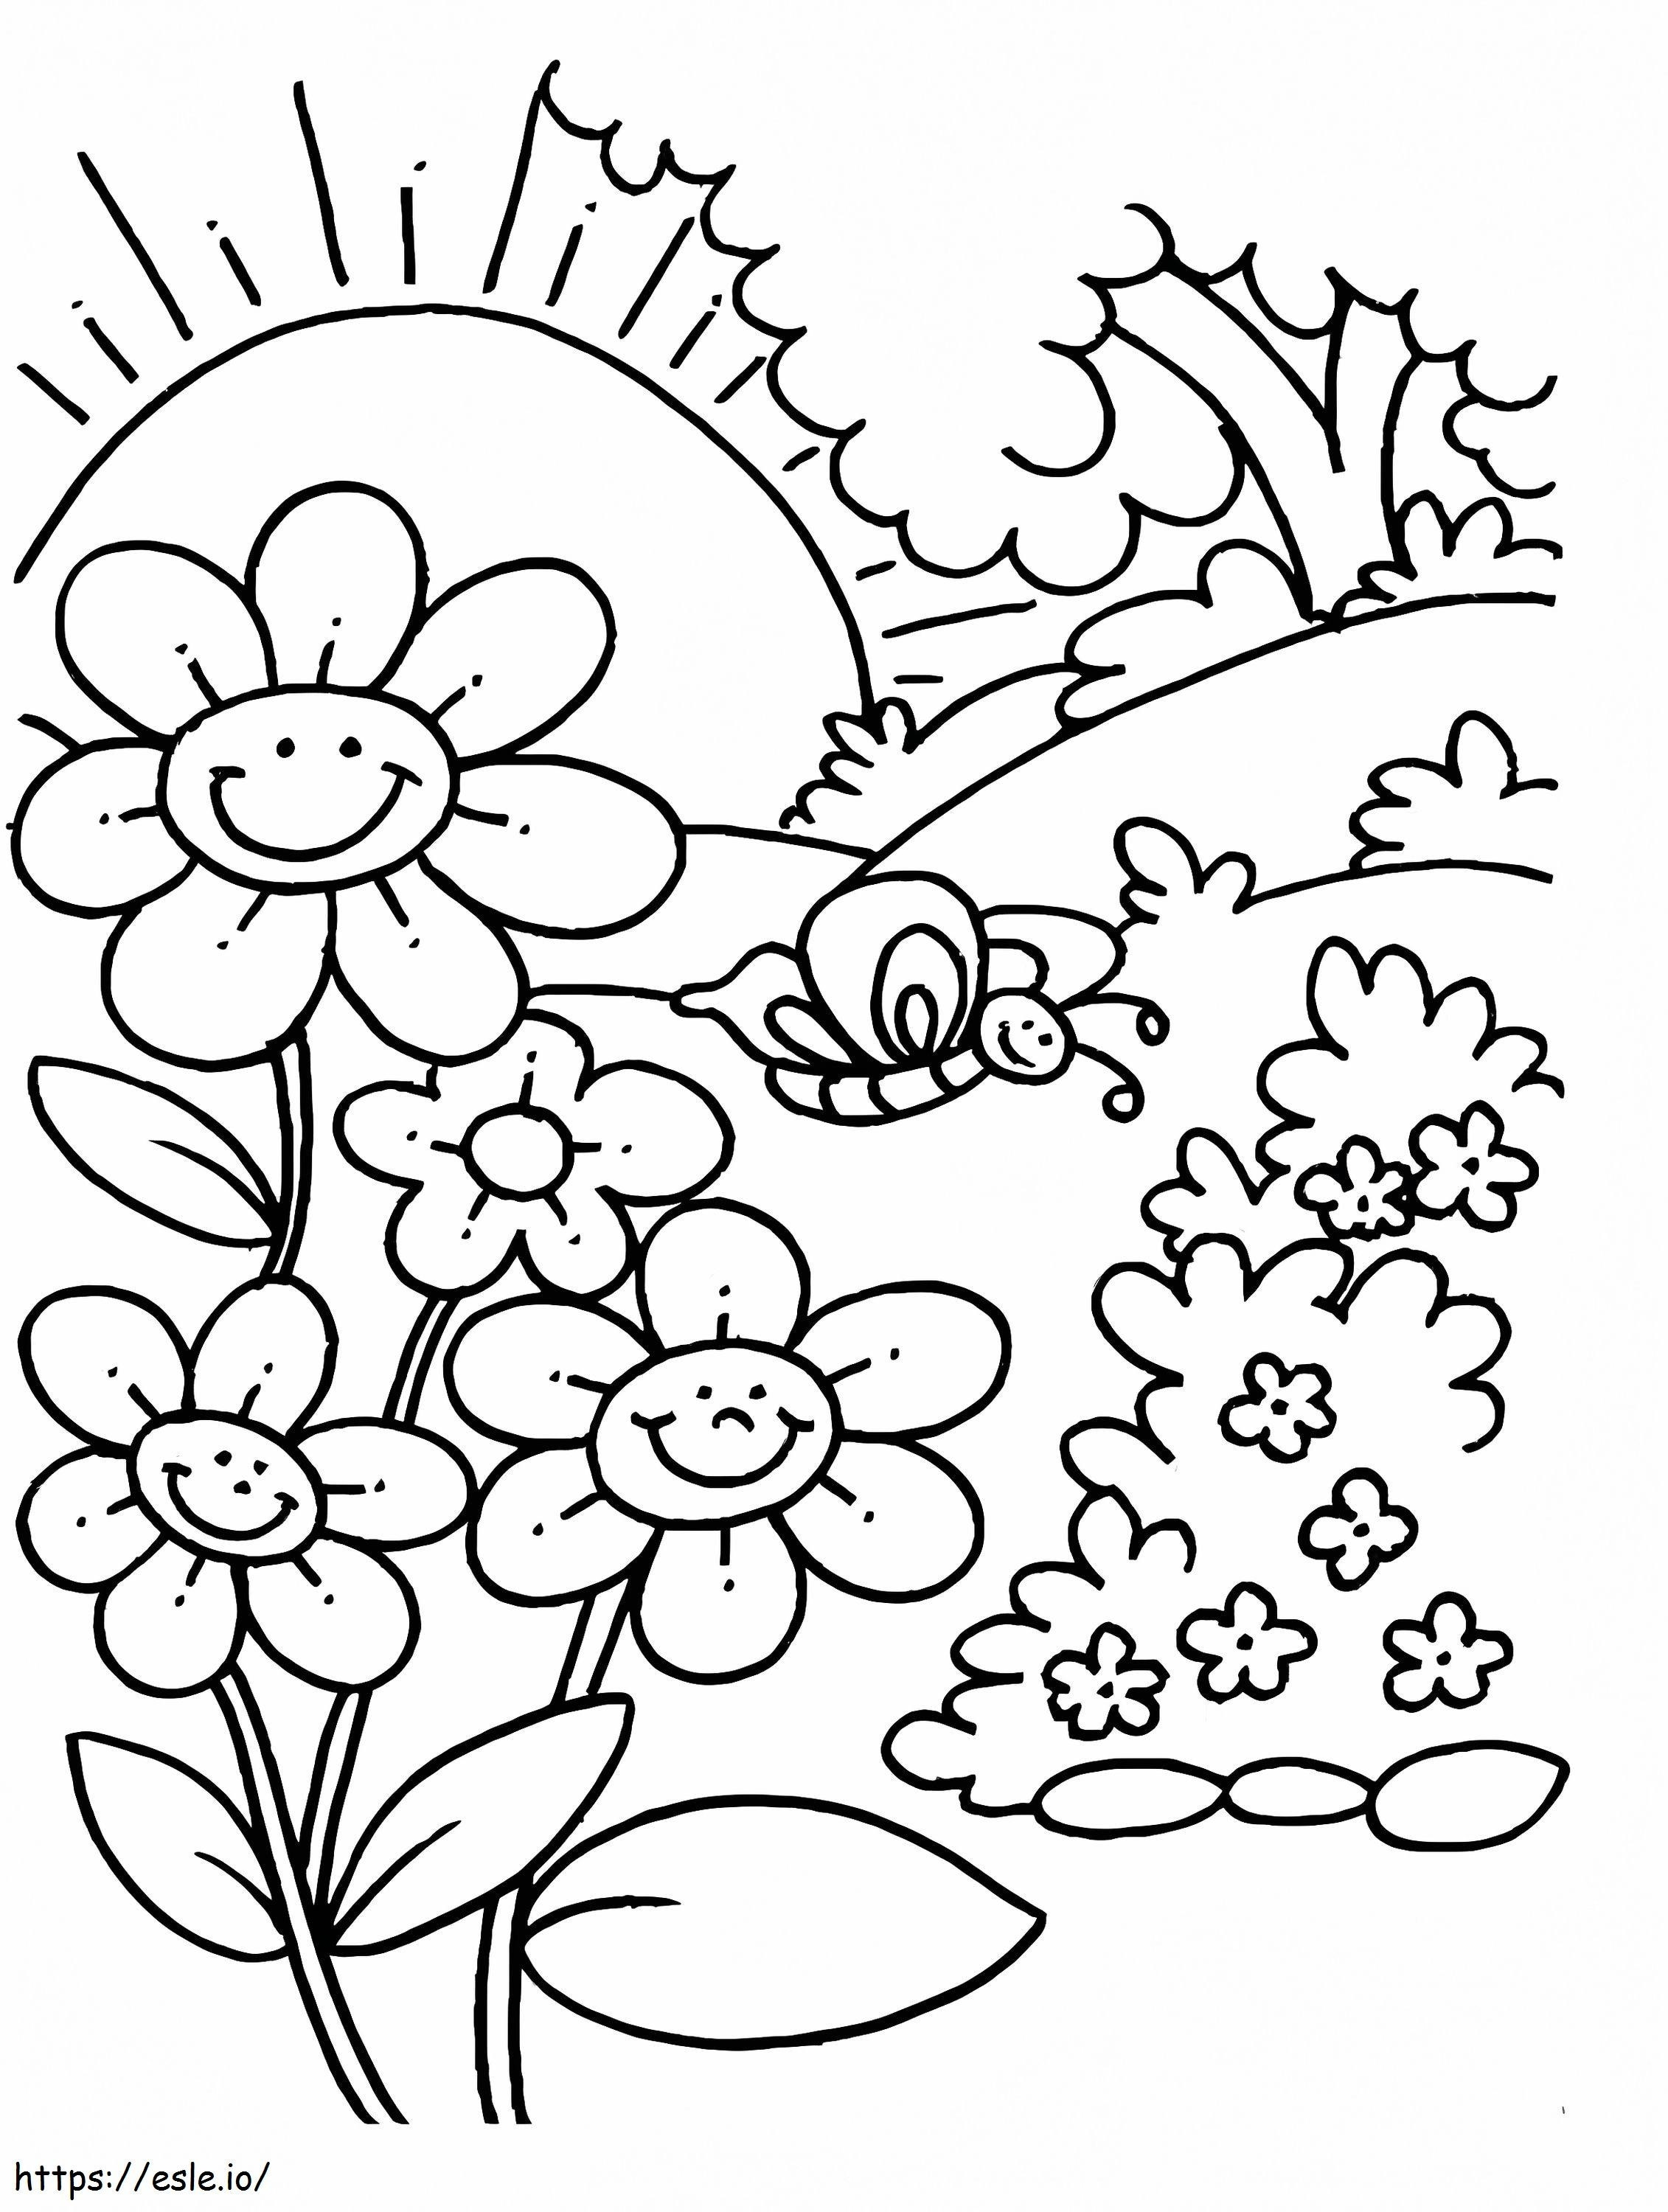 Amazing Spring coloring page